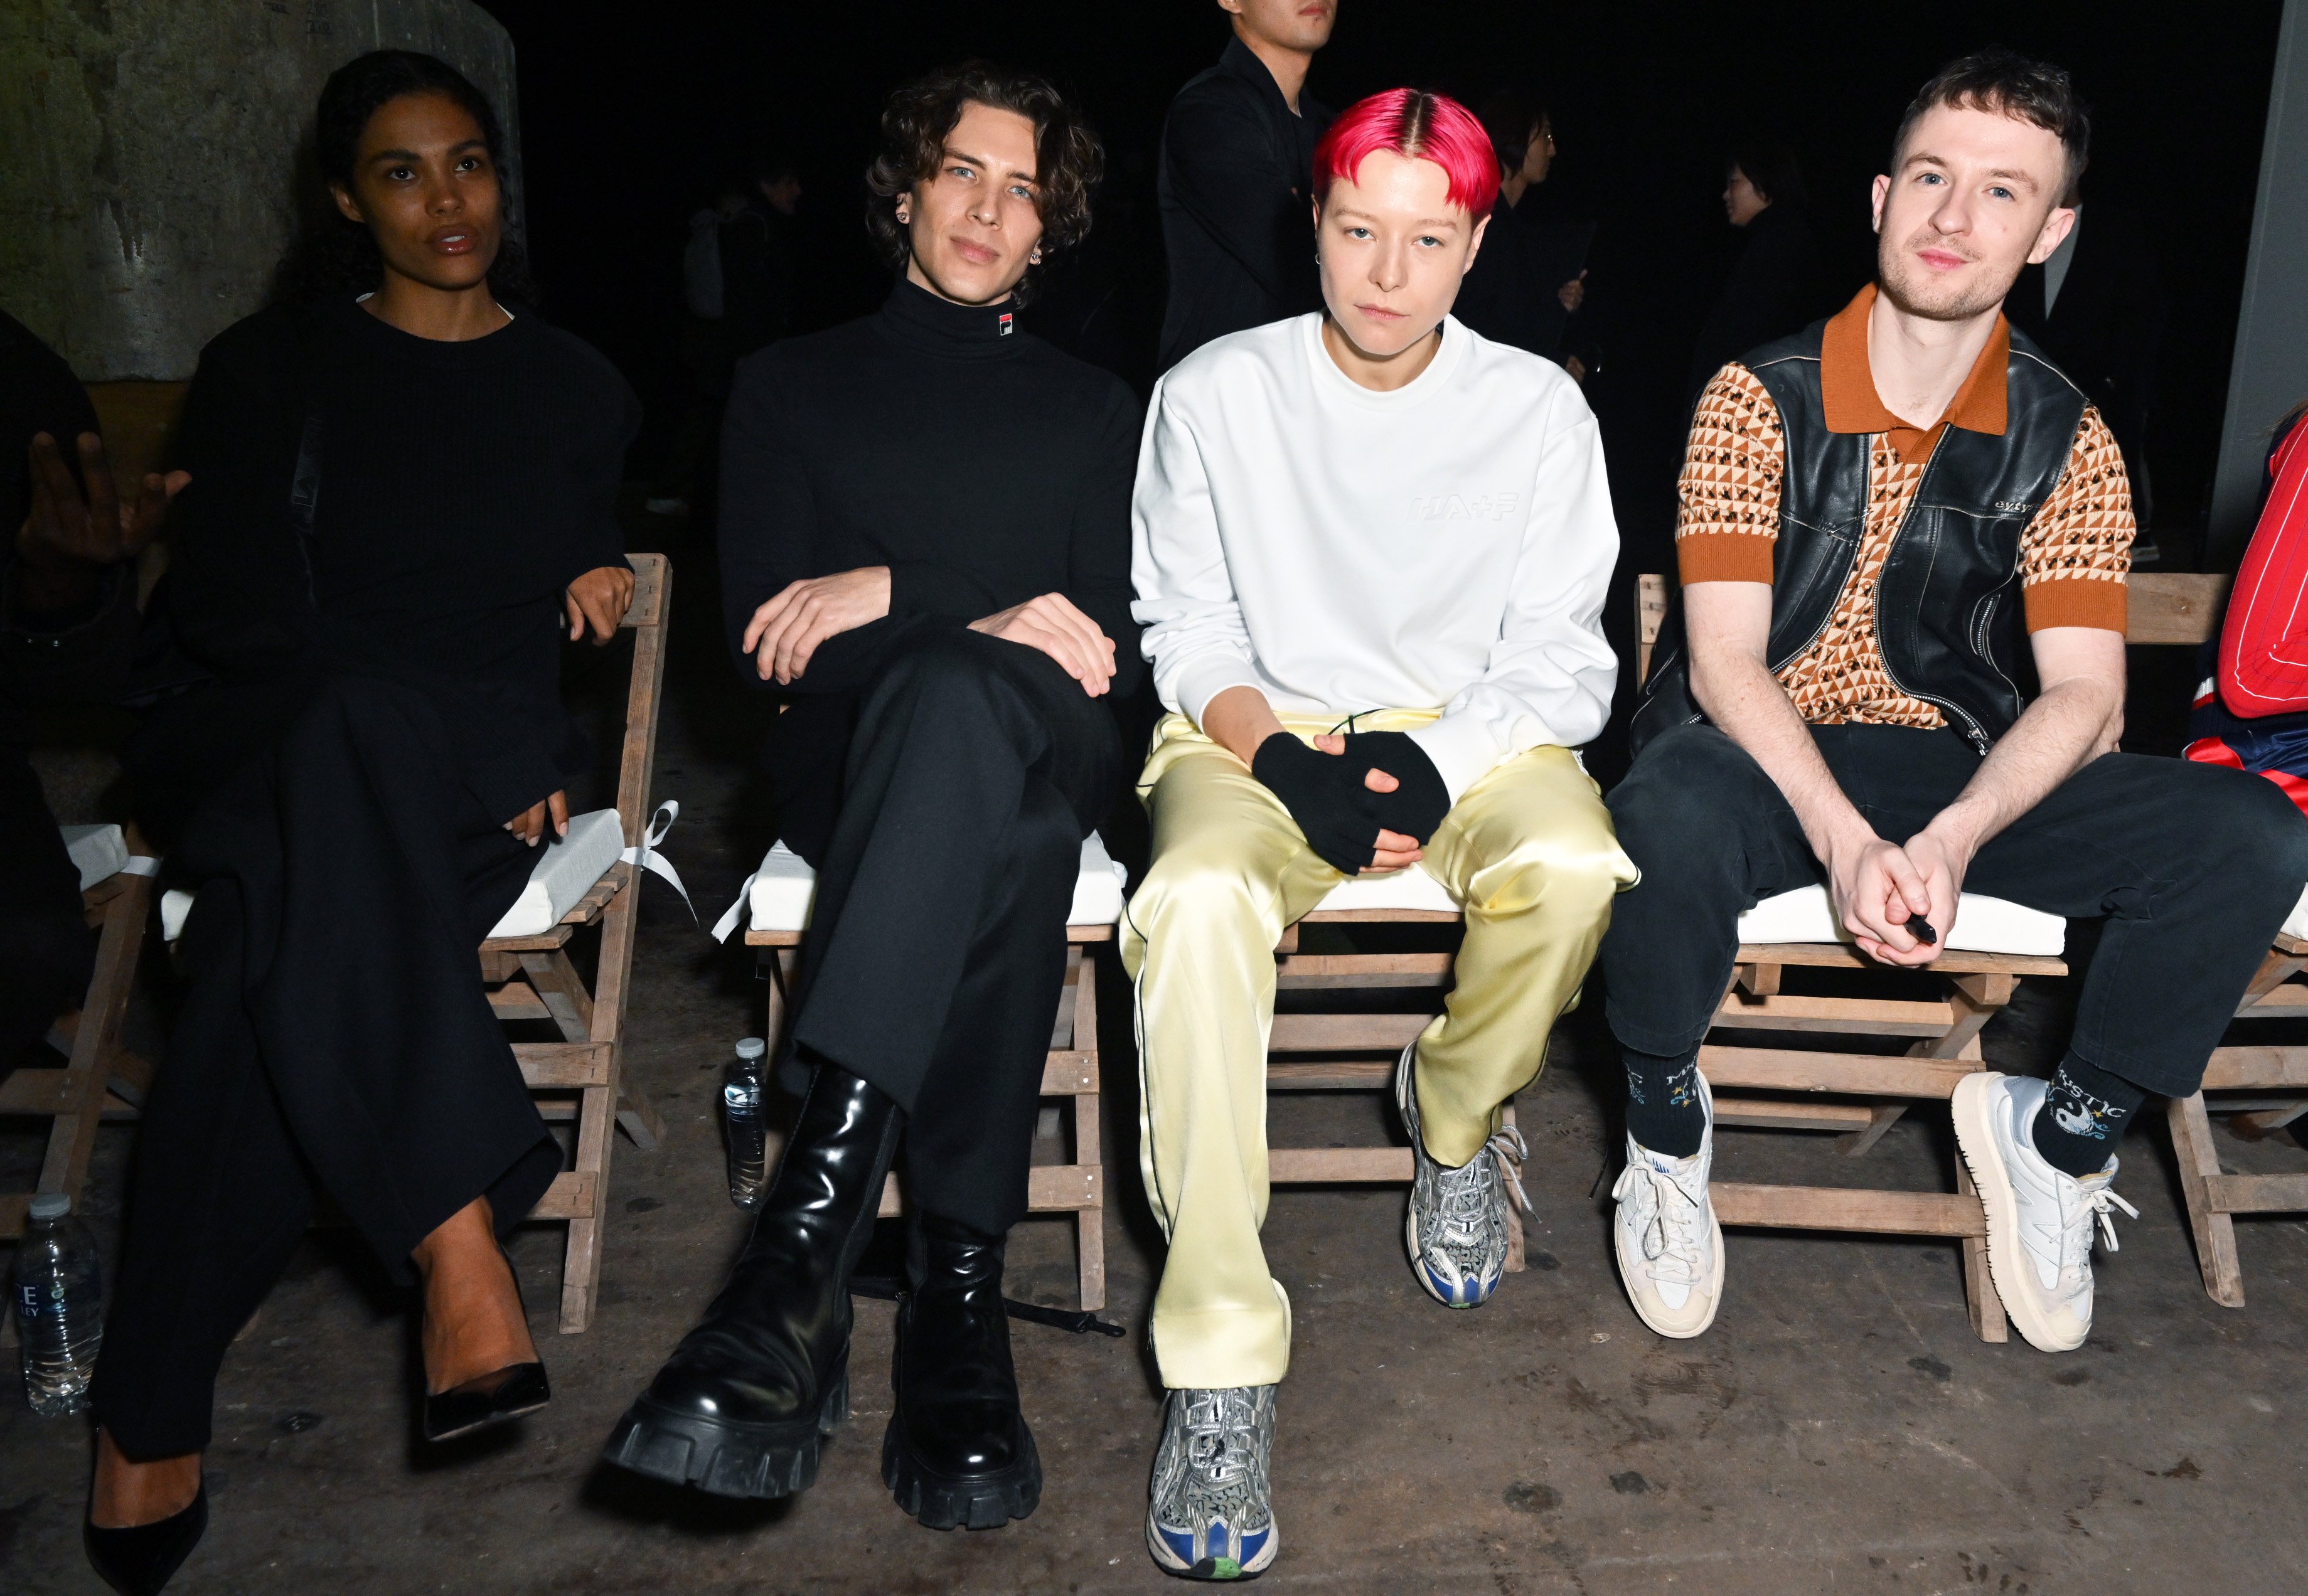 Tina Kunakey, Cody Fern, Emma D'Arcy and Thomas May Bailey attend the Haider Ackermann + FILA show on November 17, 2022, in Manchester, England.  | Source: Getty Images